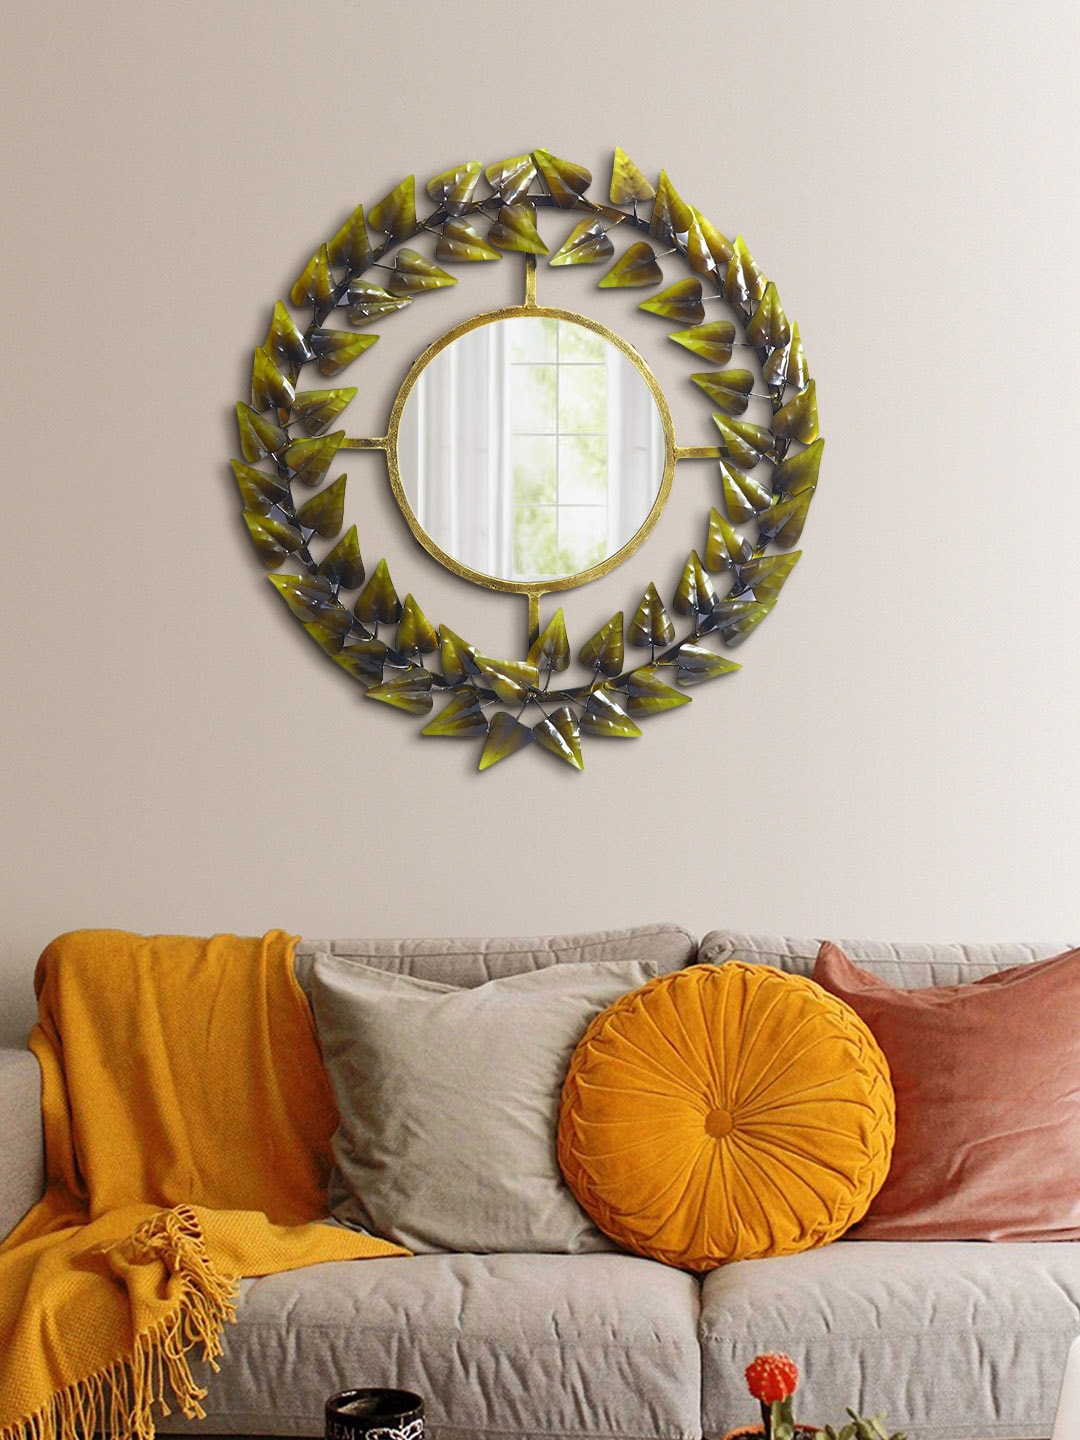 Aapno Rajasthan Gold-Toned Patterned Round Wall Mirror Price in India